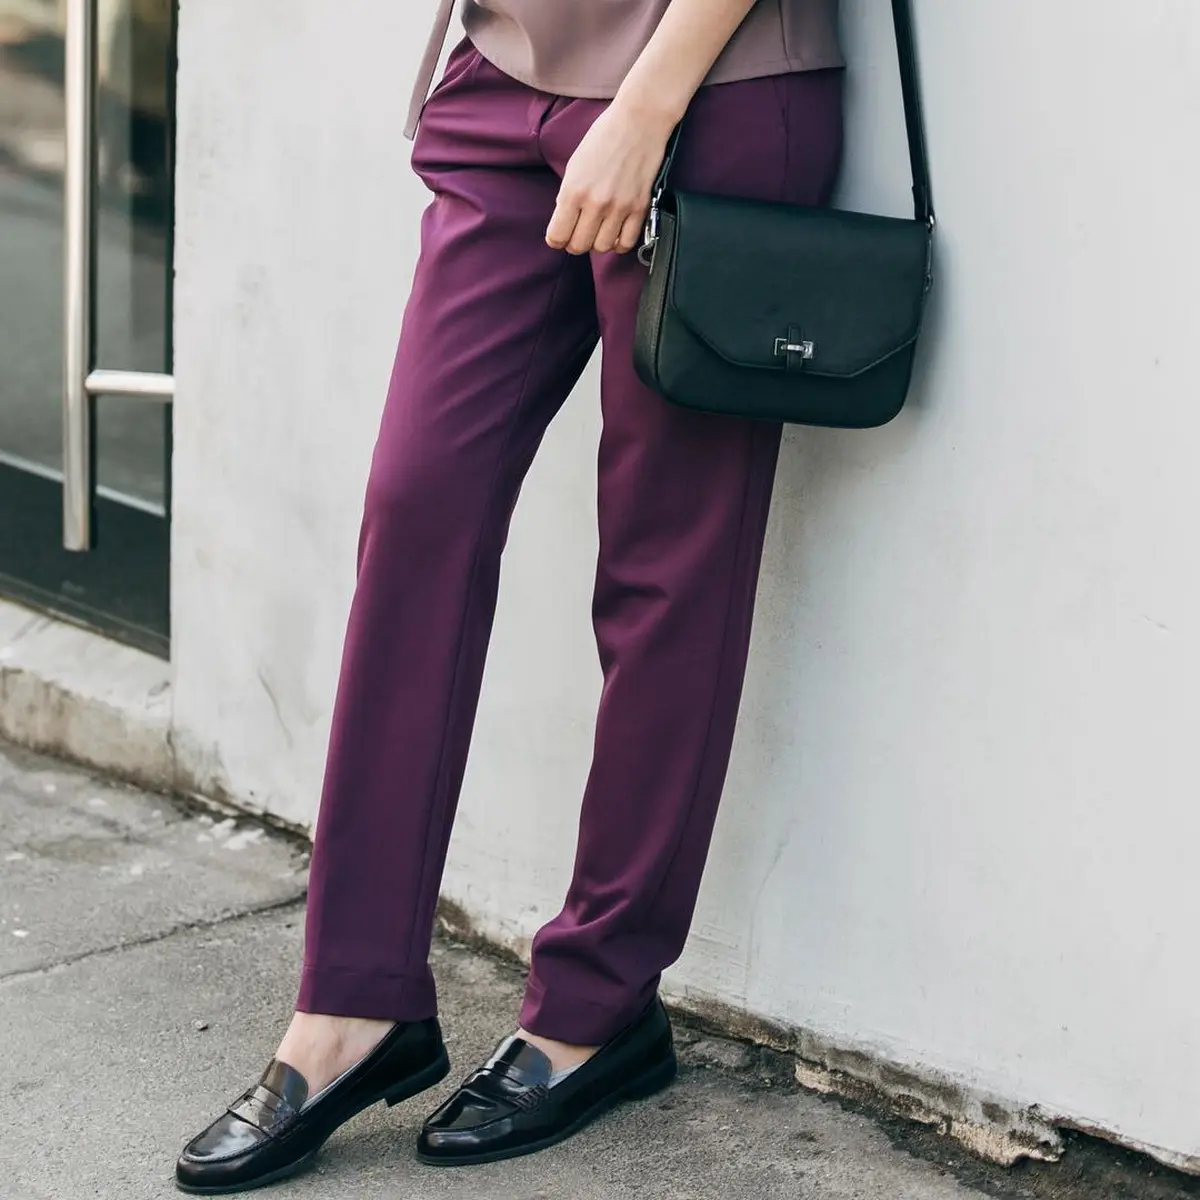 Visual Guide To What Color Trousers To Coordinate With Purple Shoes 